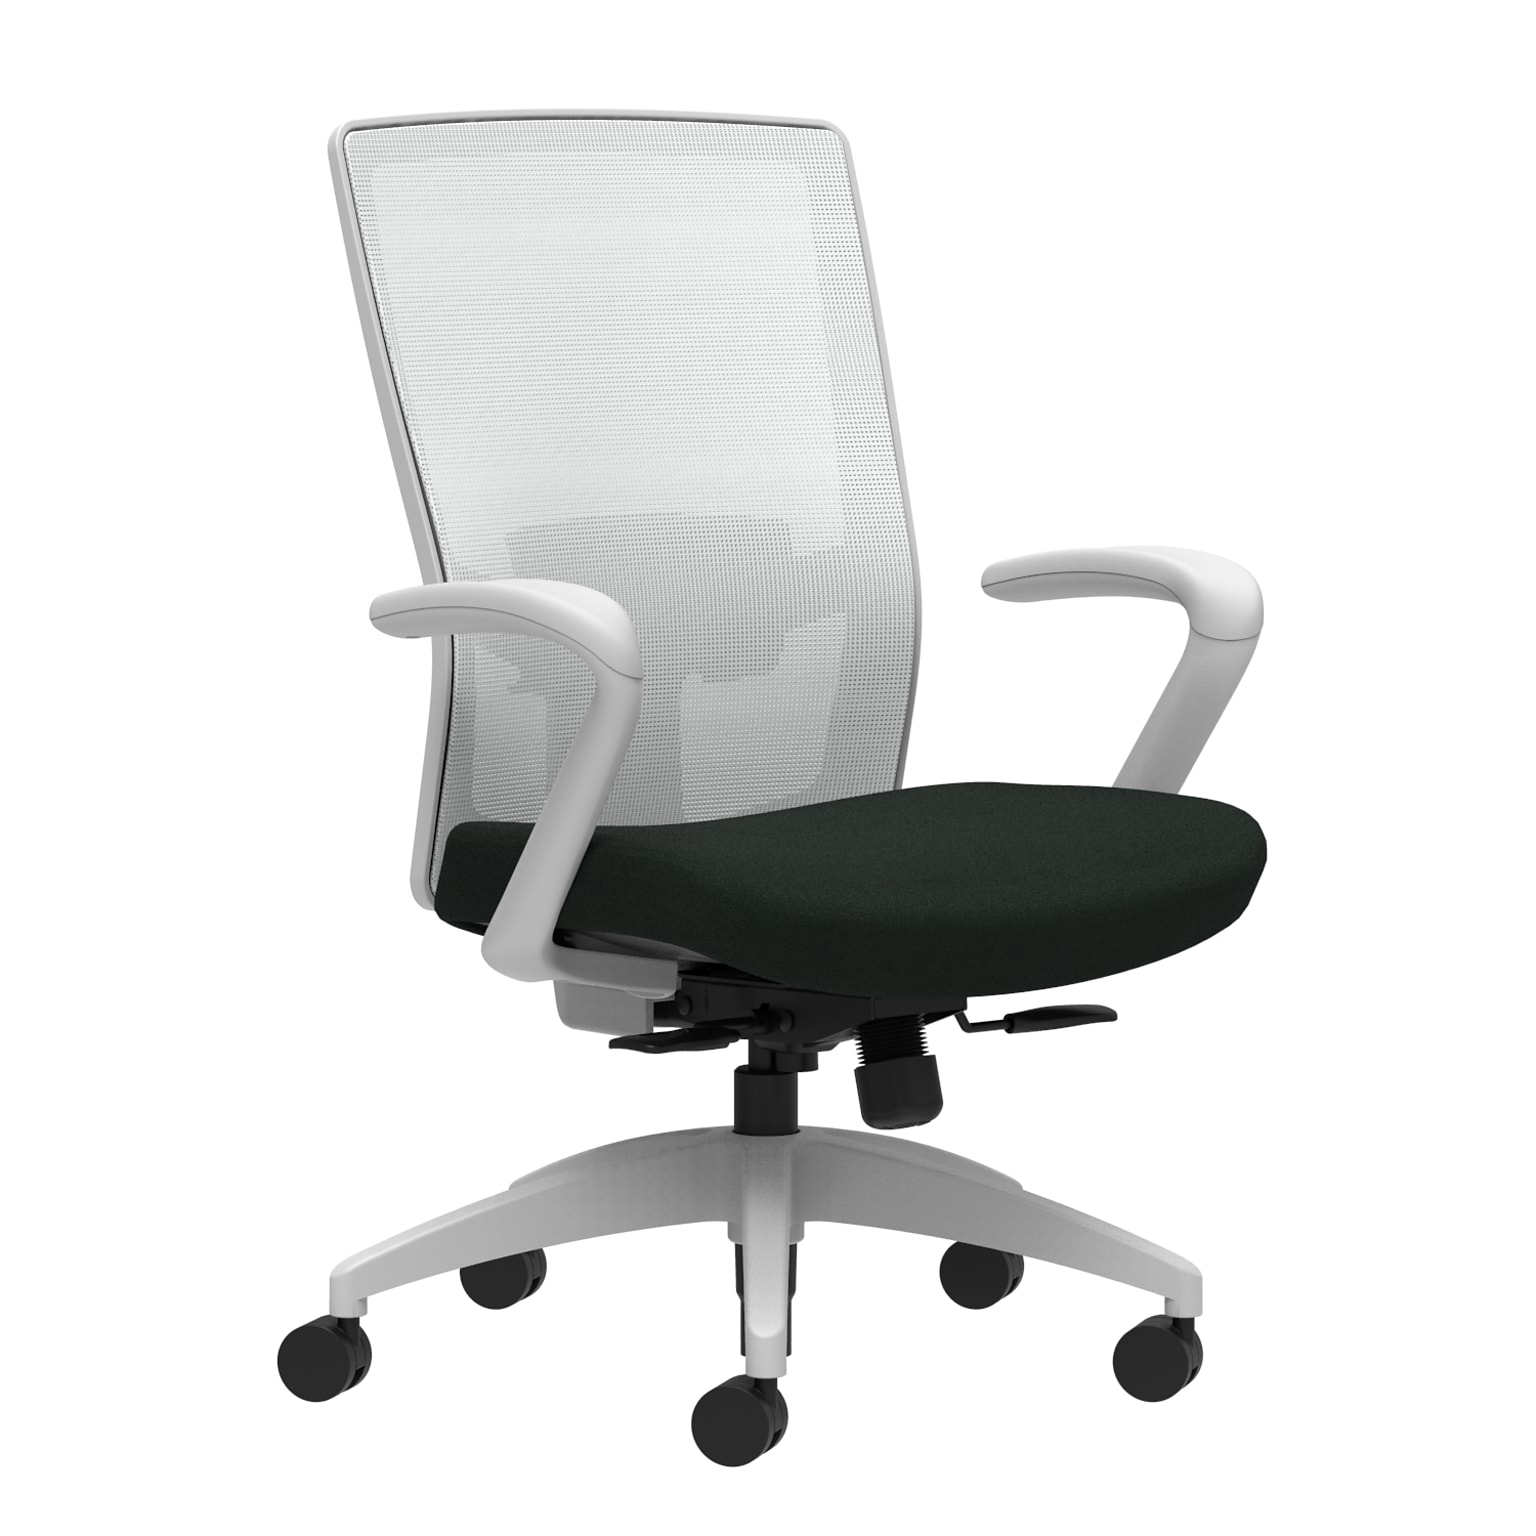 Union & Scale Workplace2.0™ Task Chair, Black Vinyl, Adjustable Lumbar, Fixed Arms, Synchro-Tilt w/ Seat Slide Control (53529)